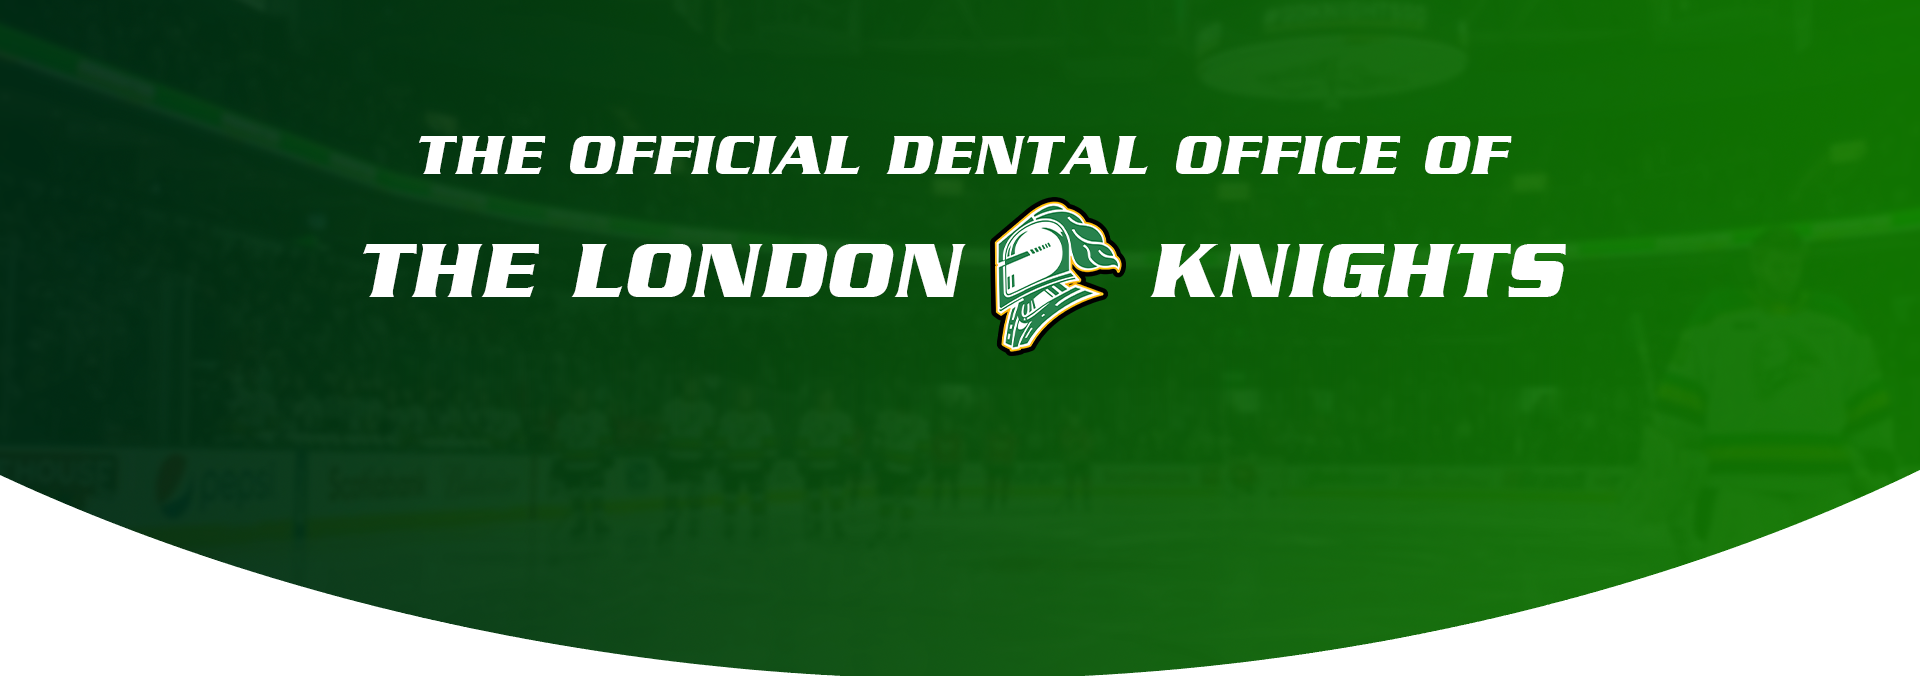 The official dental office of the London Knights